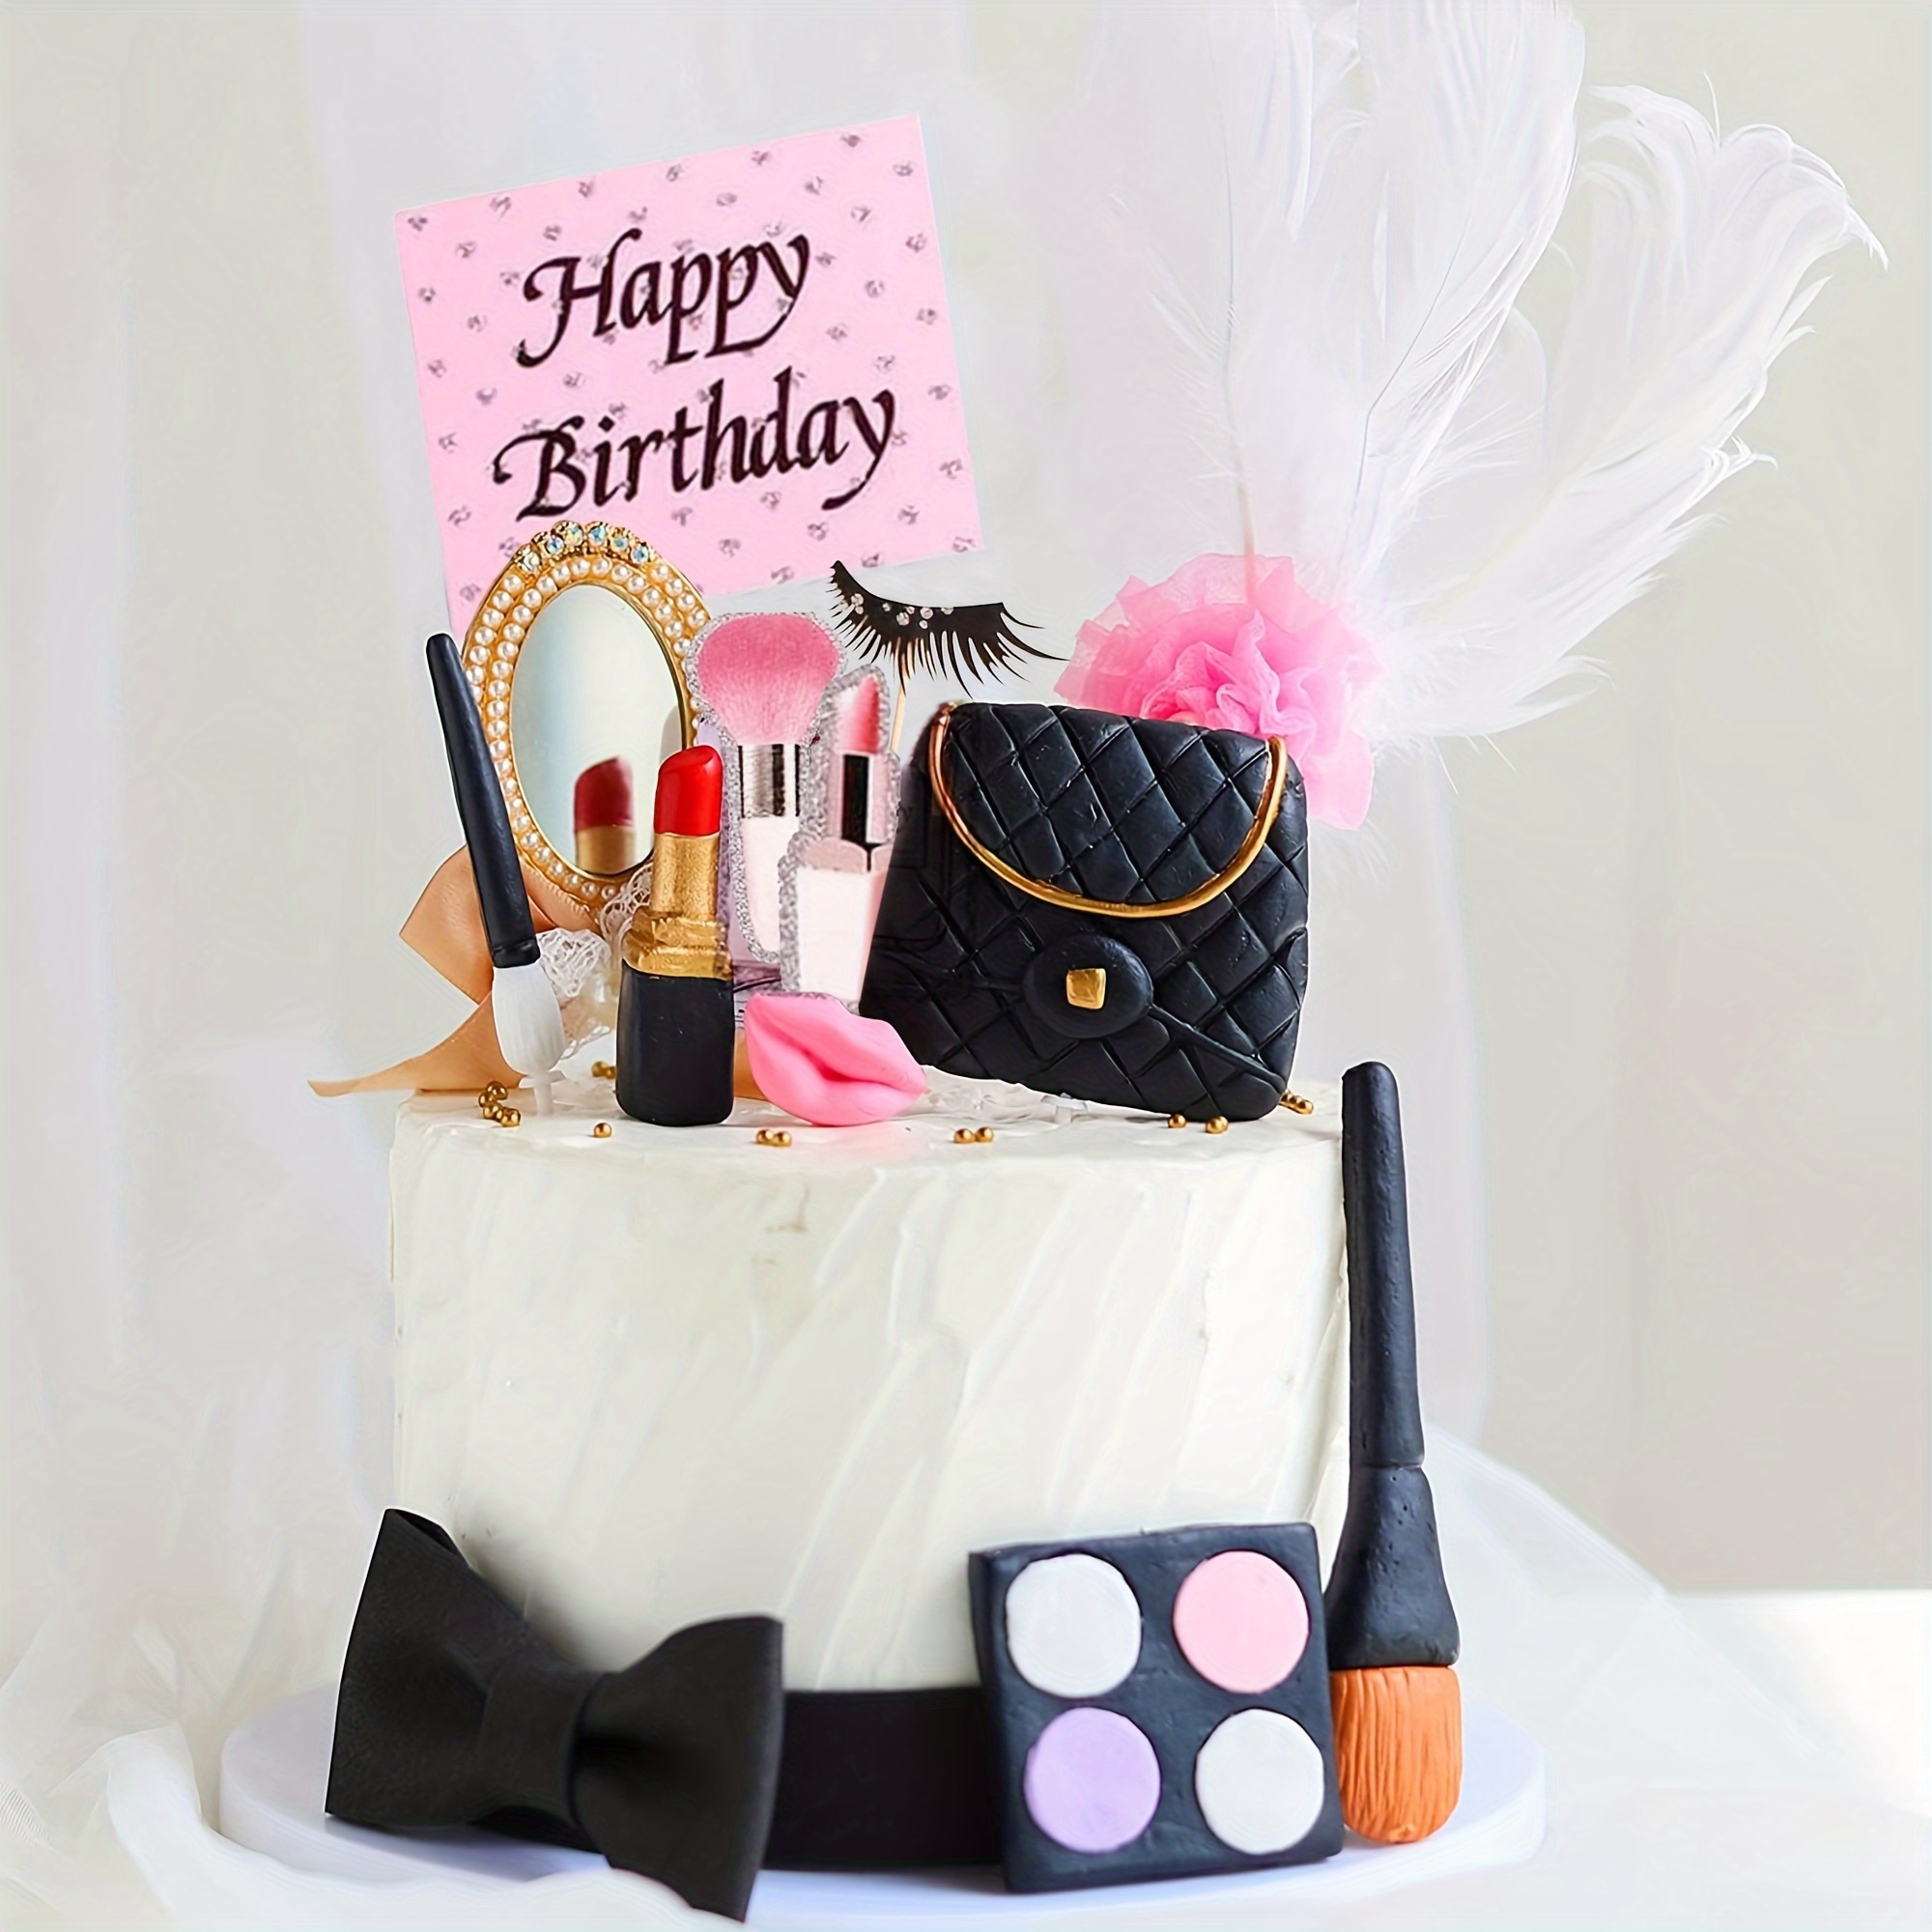 

Chic 11-piece Makeup Party Cake Topper Set - Perfect For Spa Birthdays & Celebrations, Includes Lipstick, Brush, Eyeshadow Palette & Cupcake Decorations